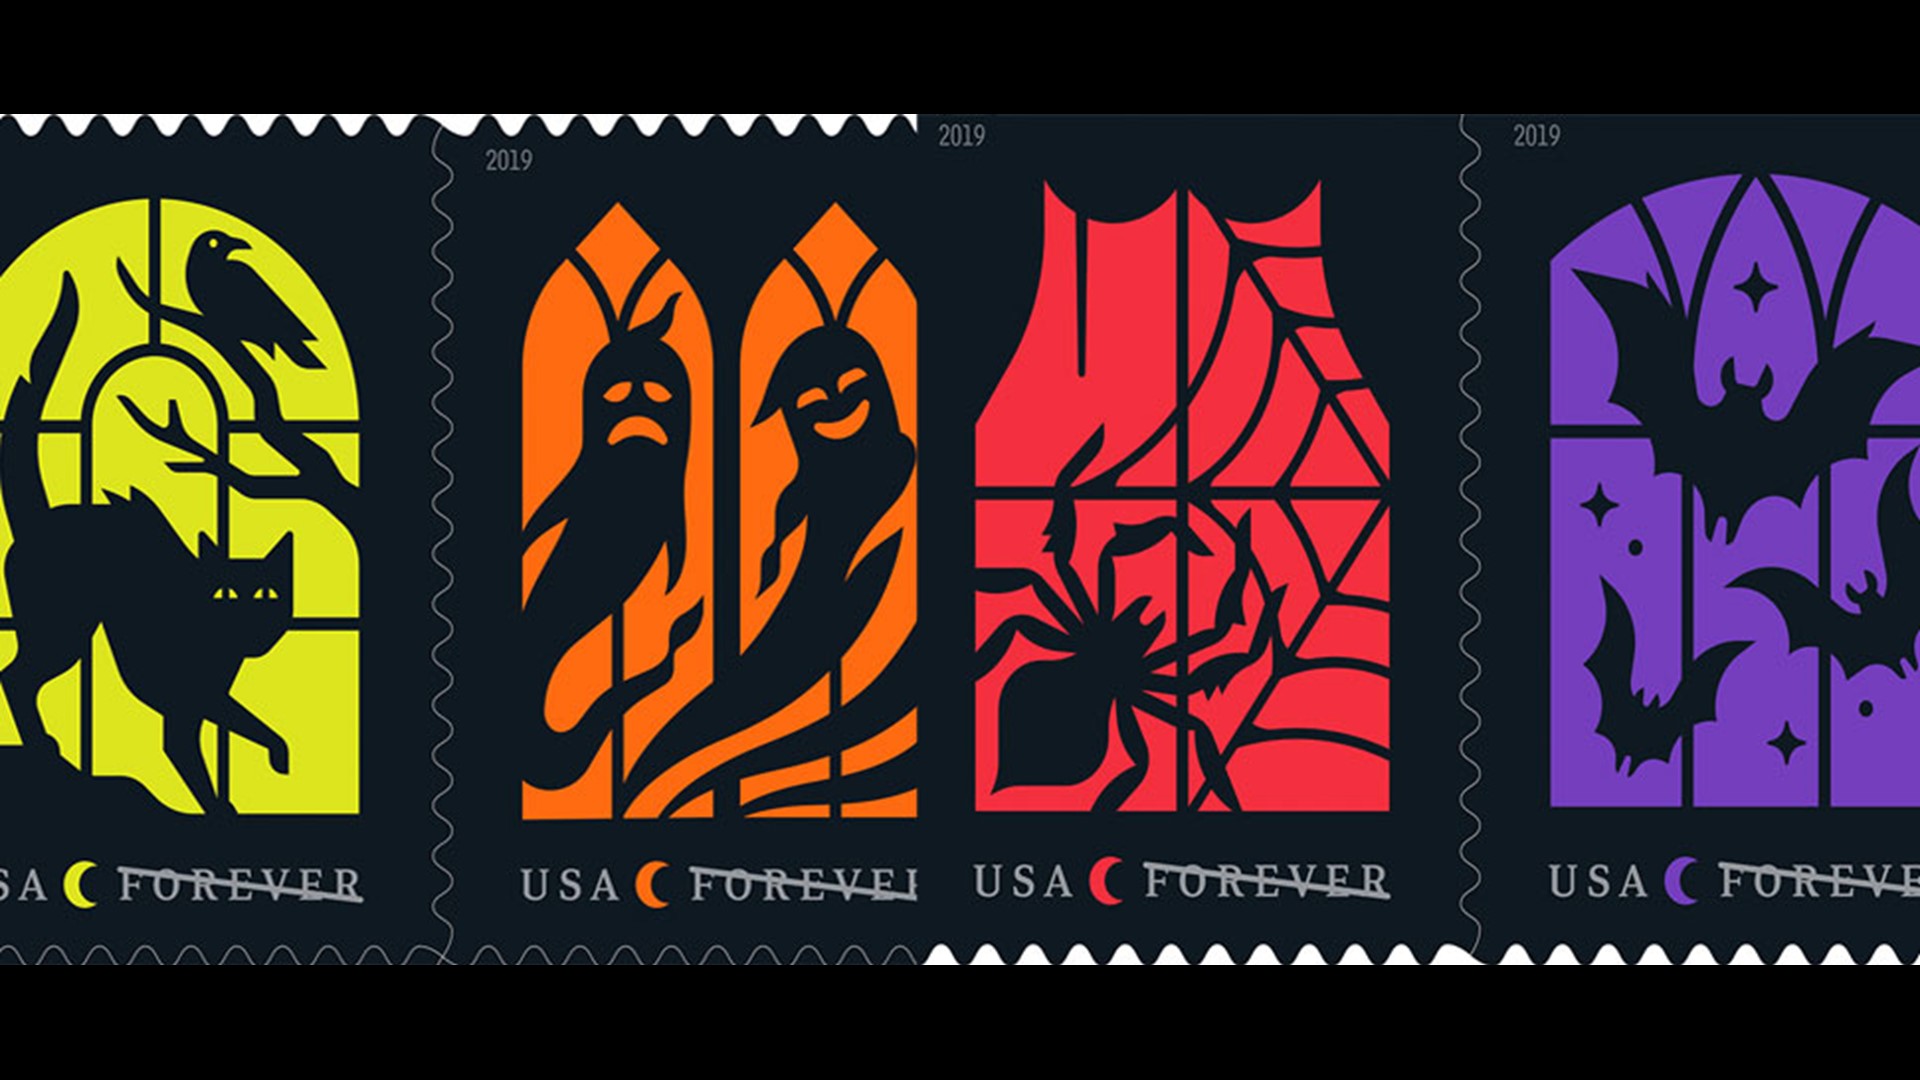 USPS releases spooky stamps in time for Halloween